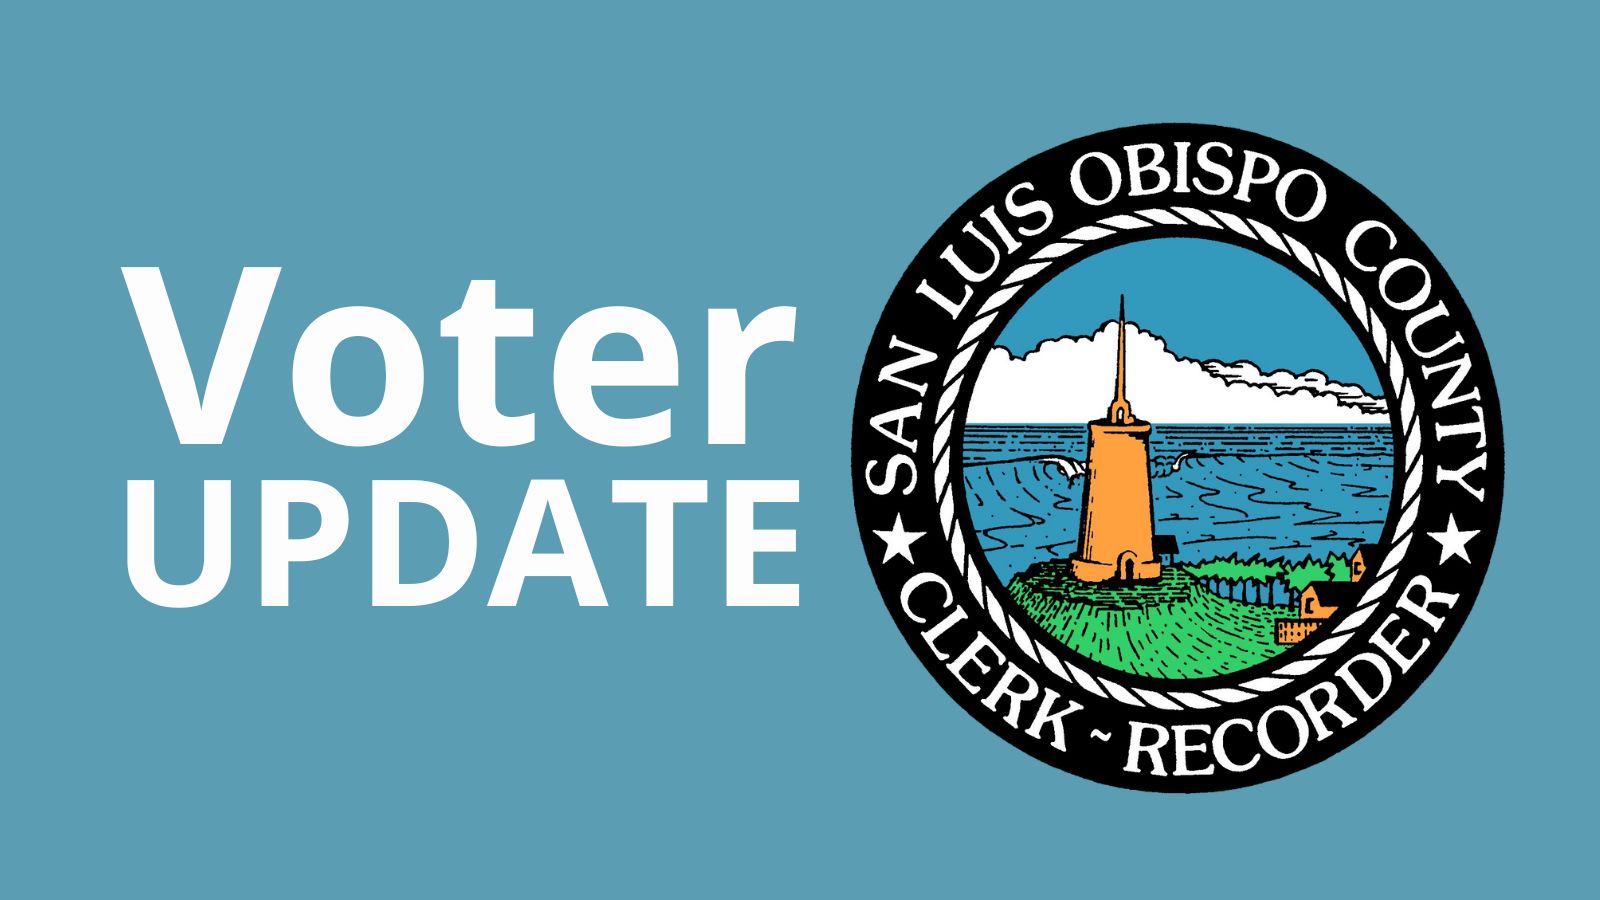 Text that says Voter Update next to the official Clerk-Recorder seal